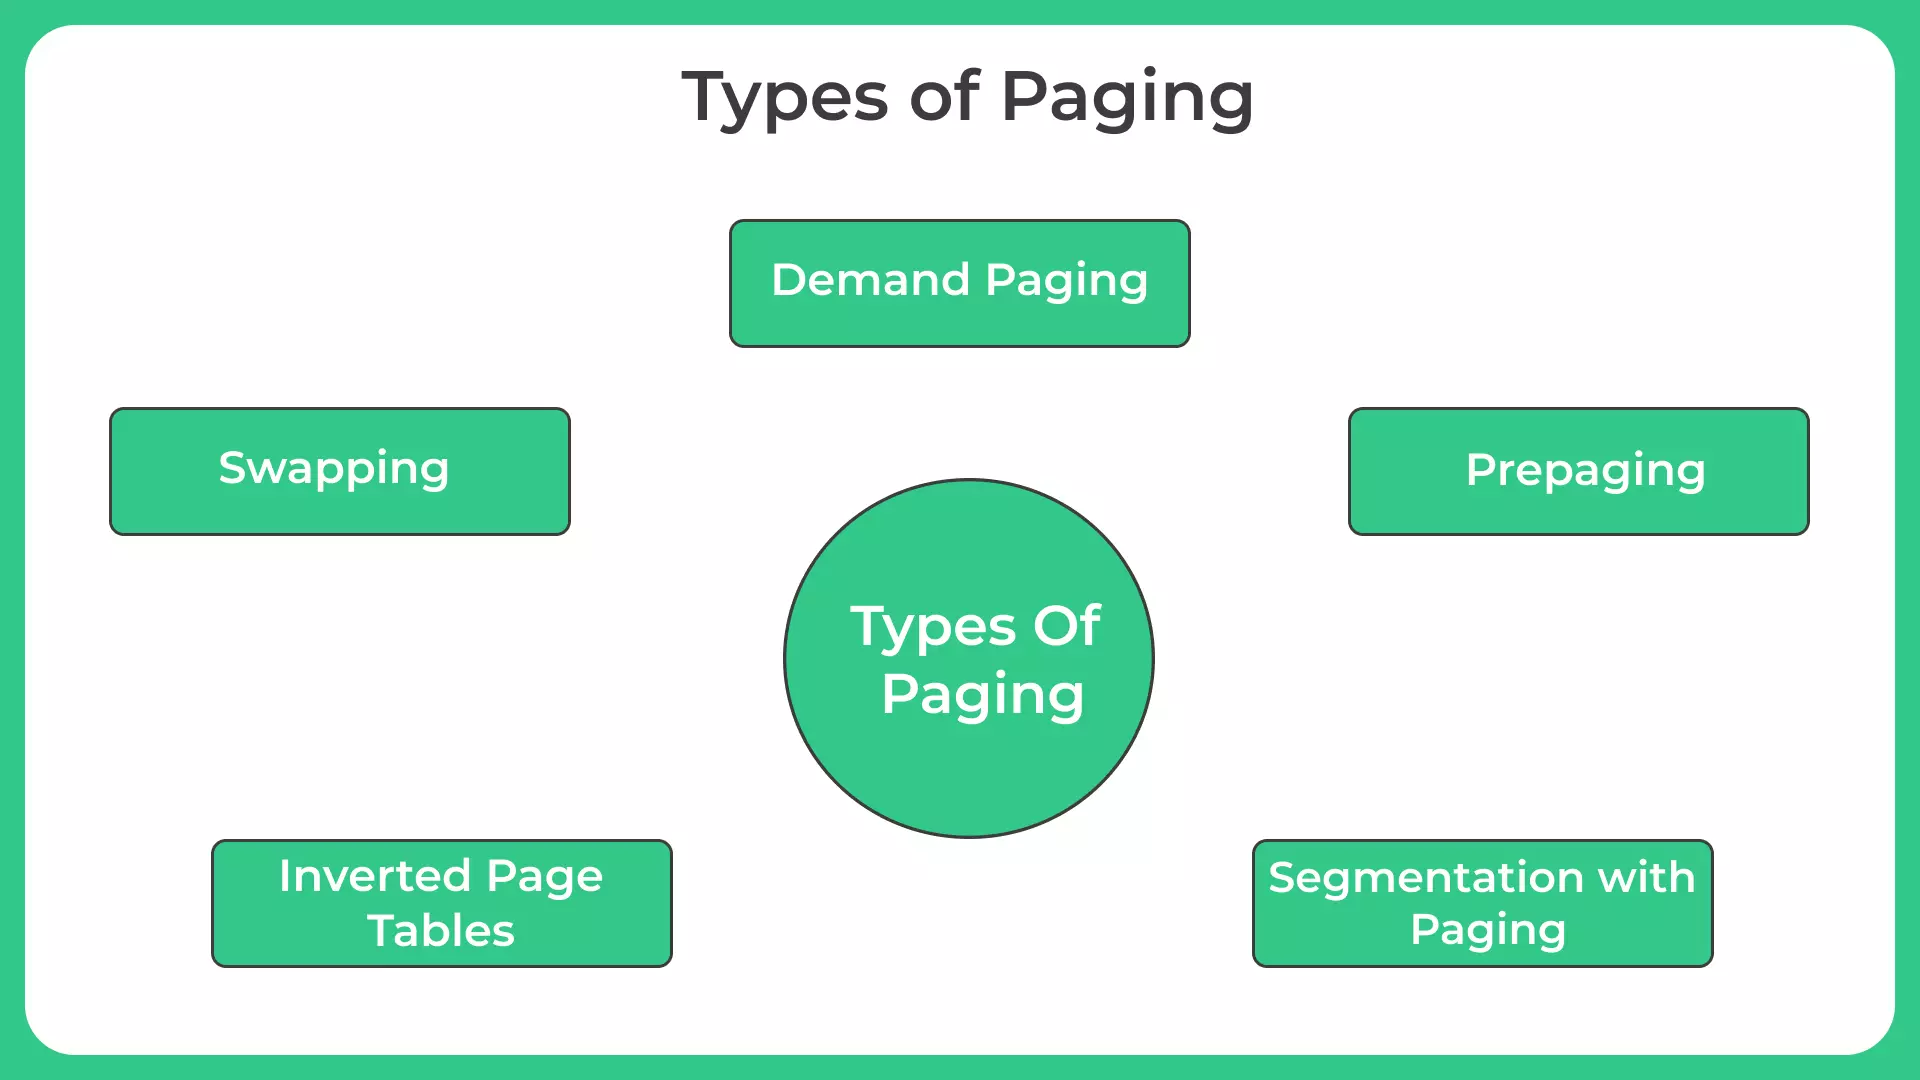 Types of Paging